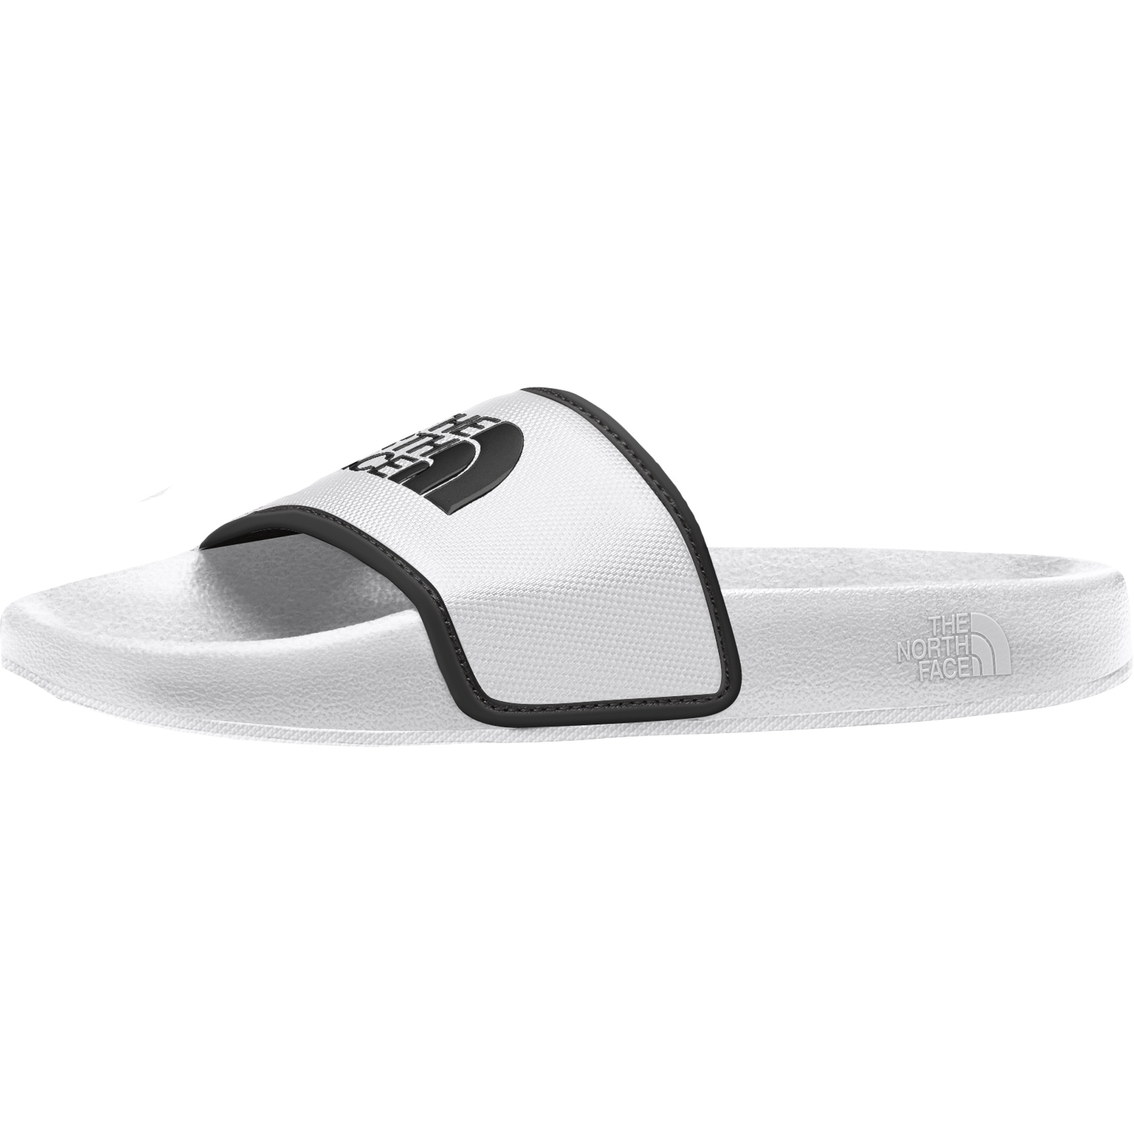 The North Face Women's Base Camp Slides III - Image 5 of 5